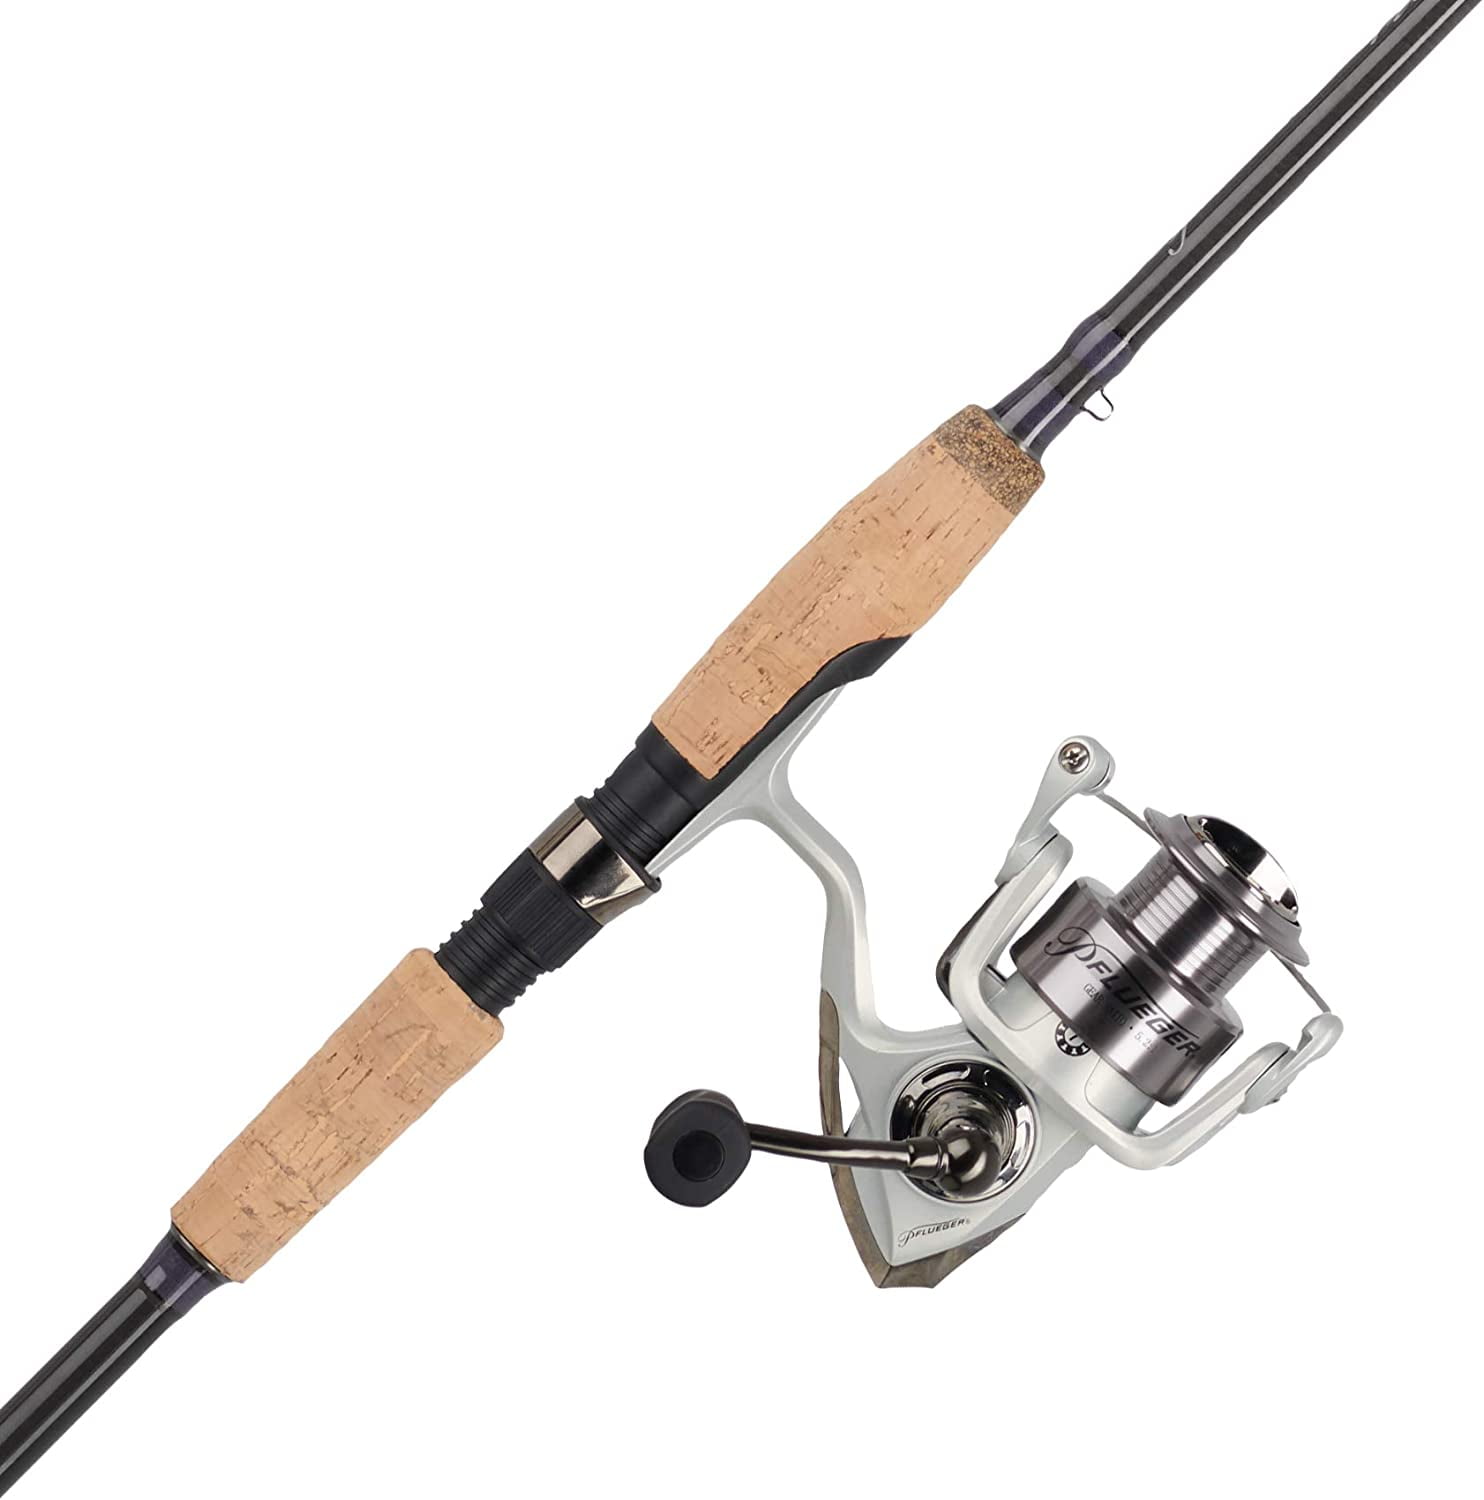 Fenwick Eagle Pflueger Trion Spinning Rod and Reel Combo with Berkley Shad Bait Kit